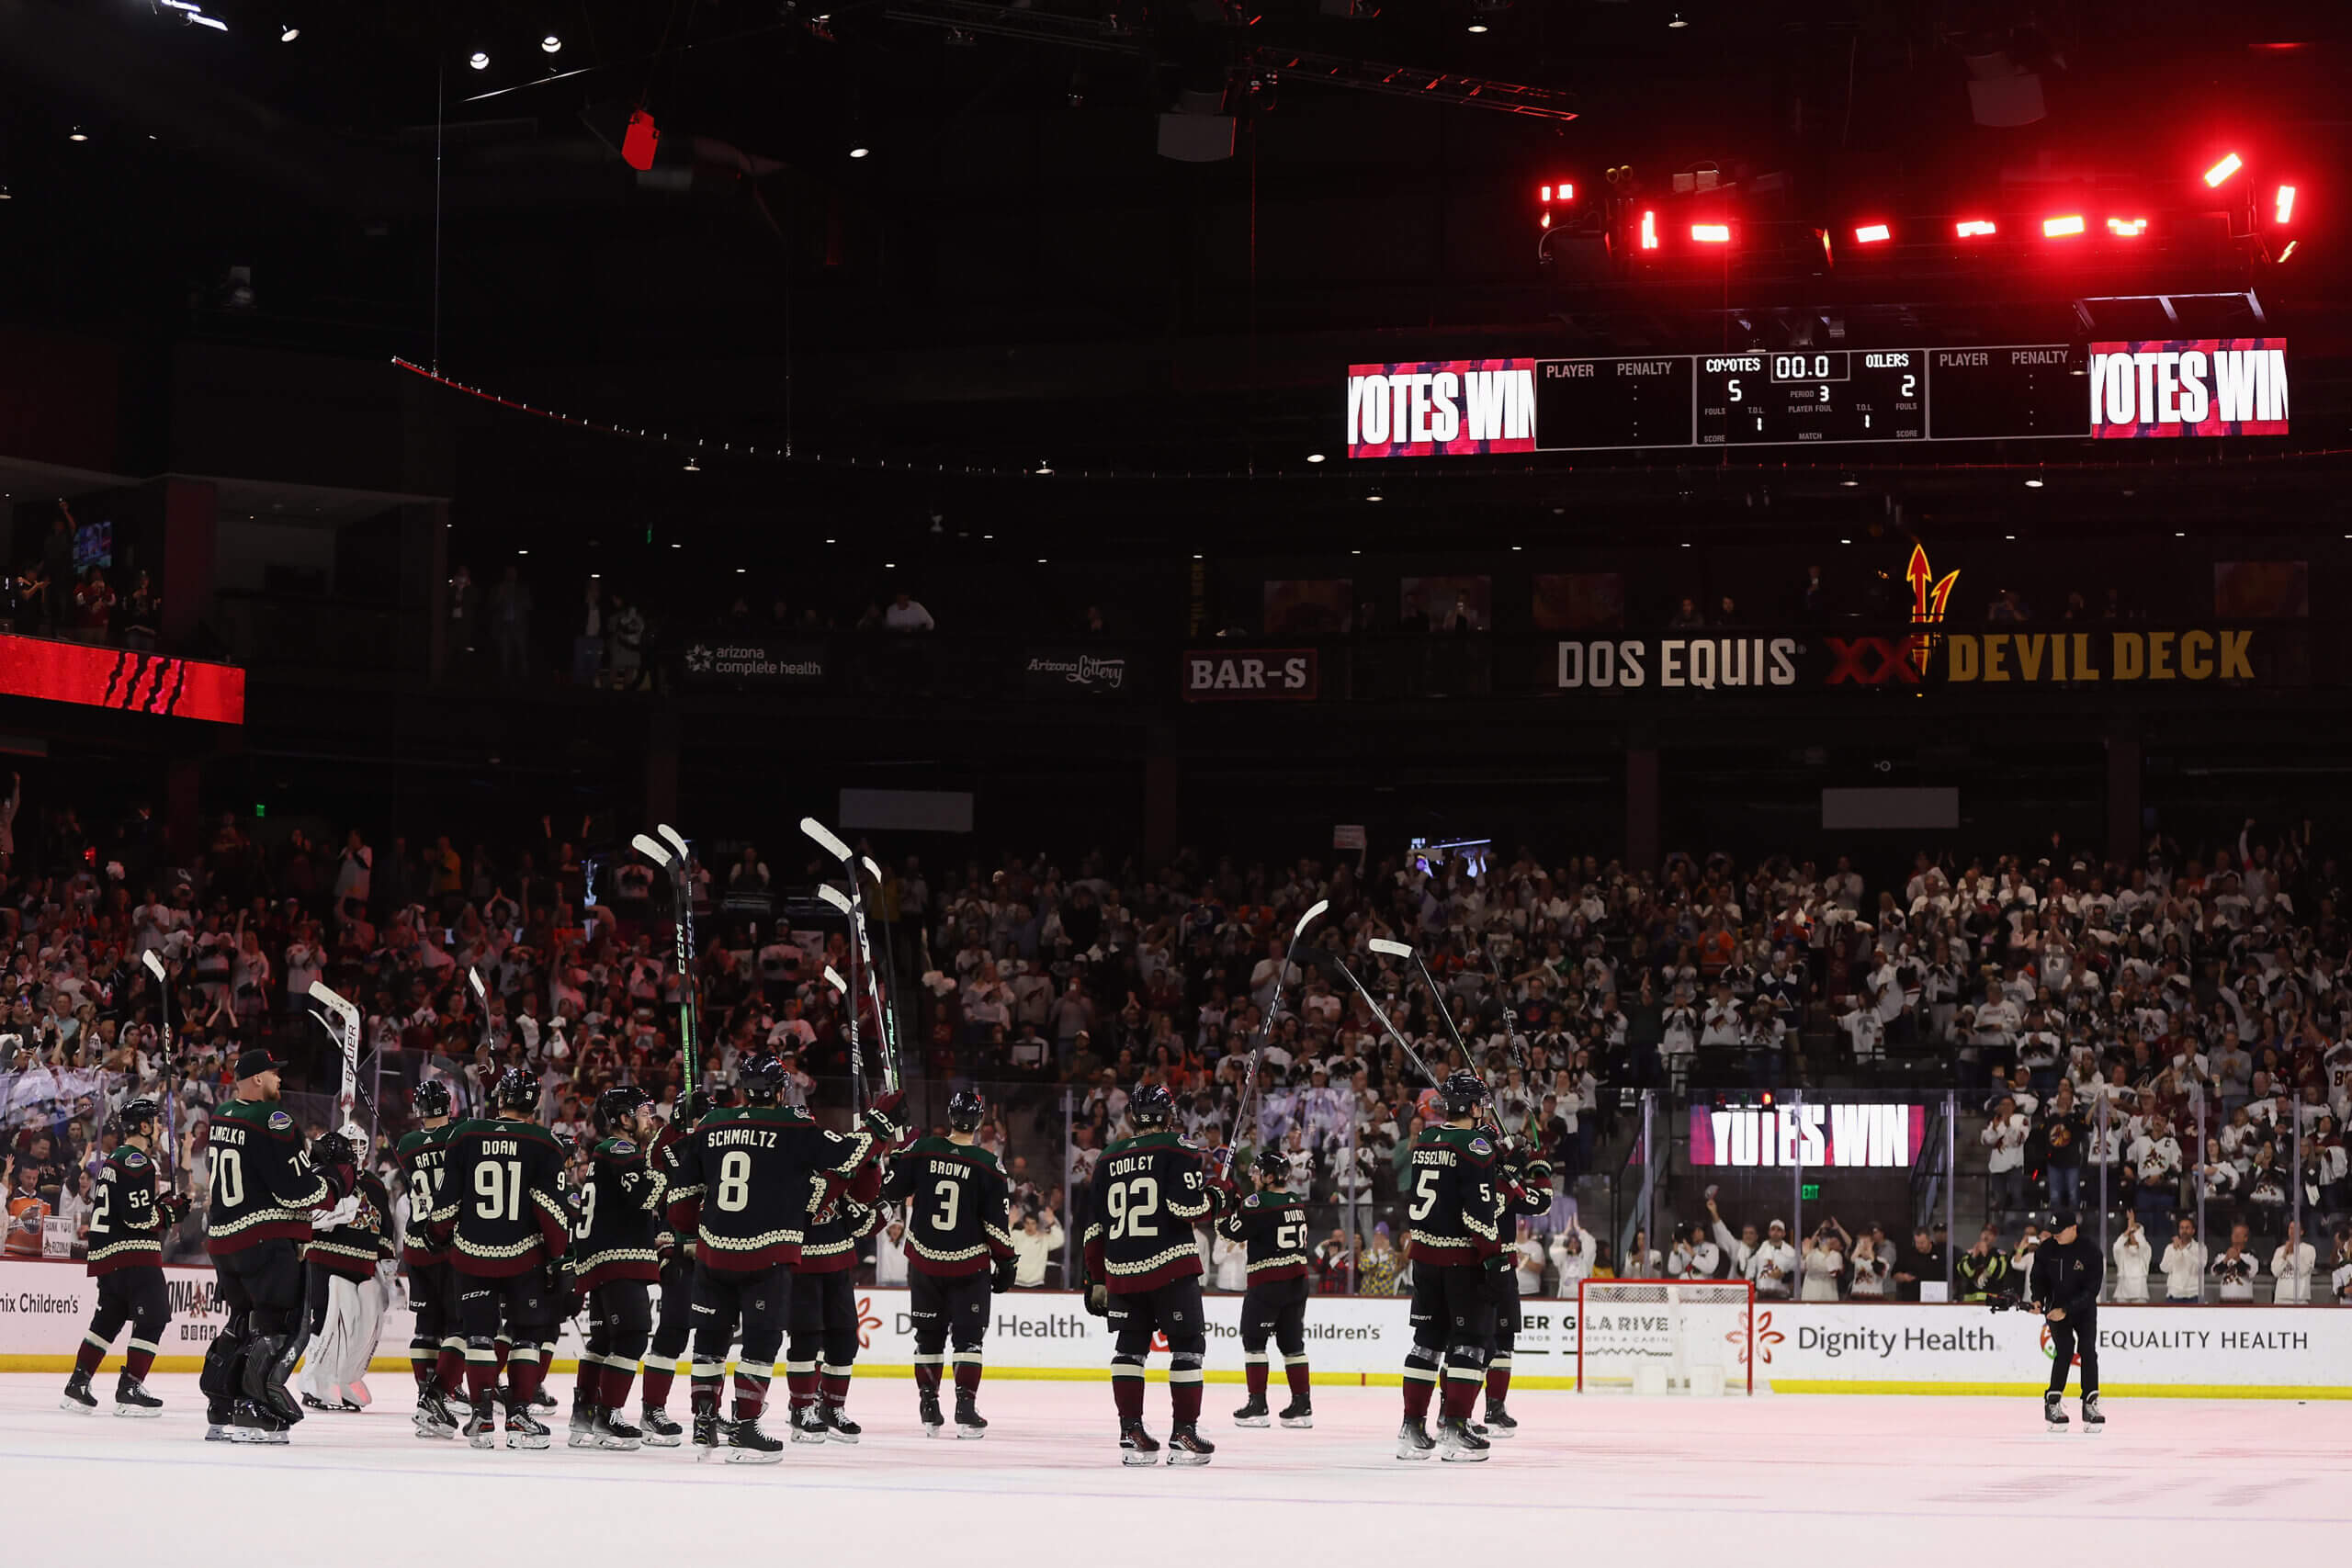 Coyotes say goodbye, close chapter in Arizona before Salt Lake City relocation